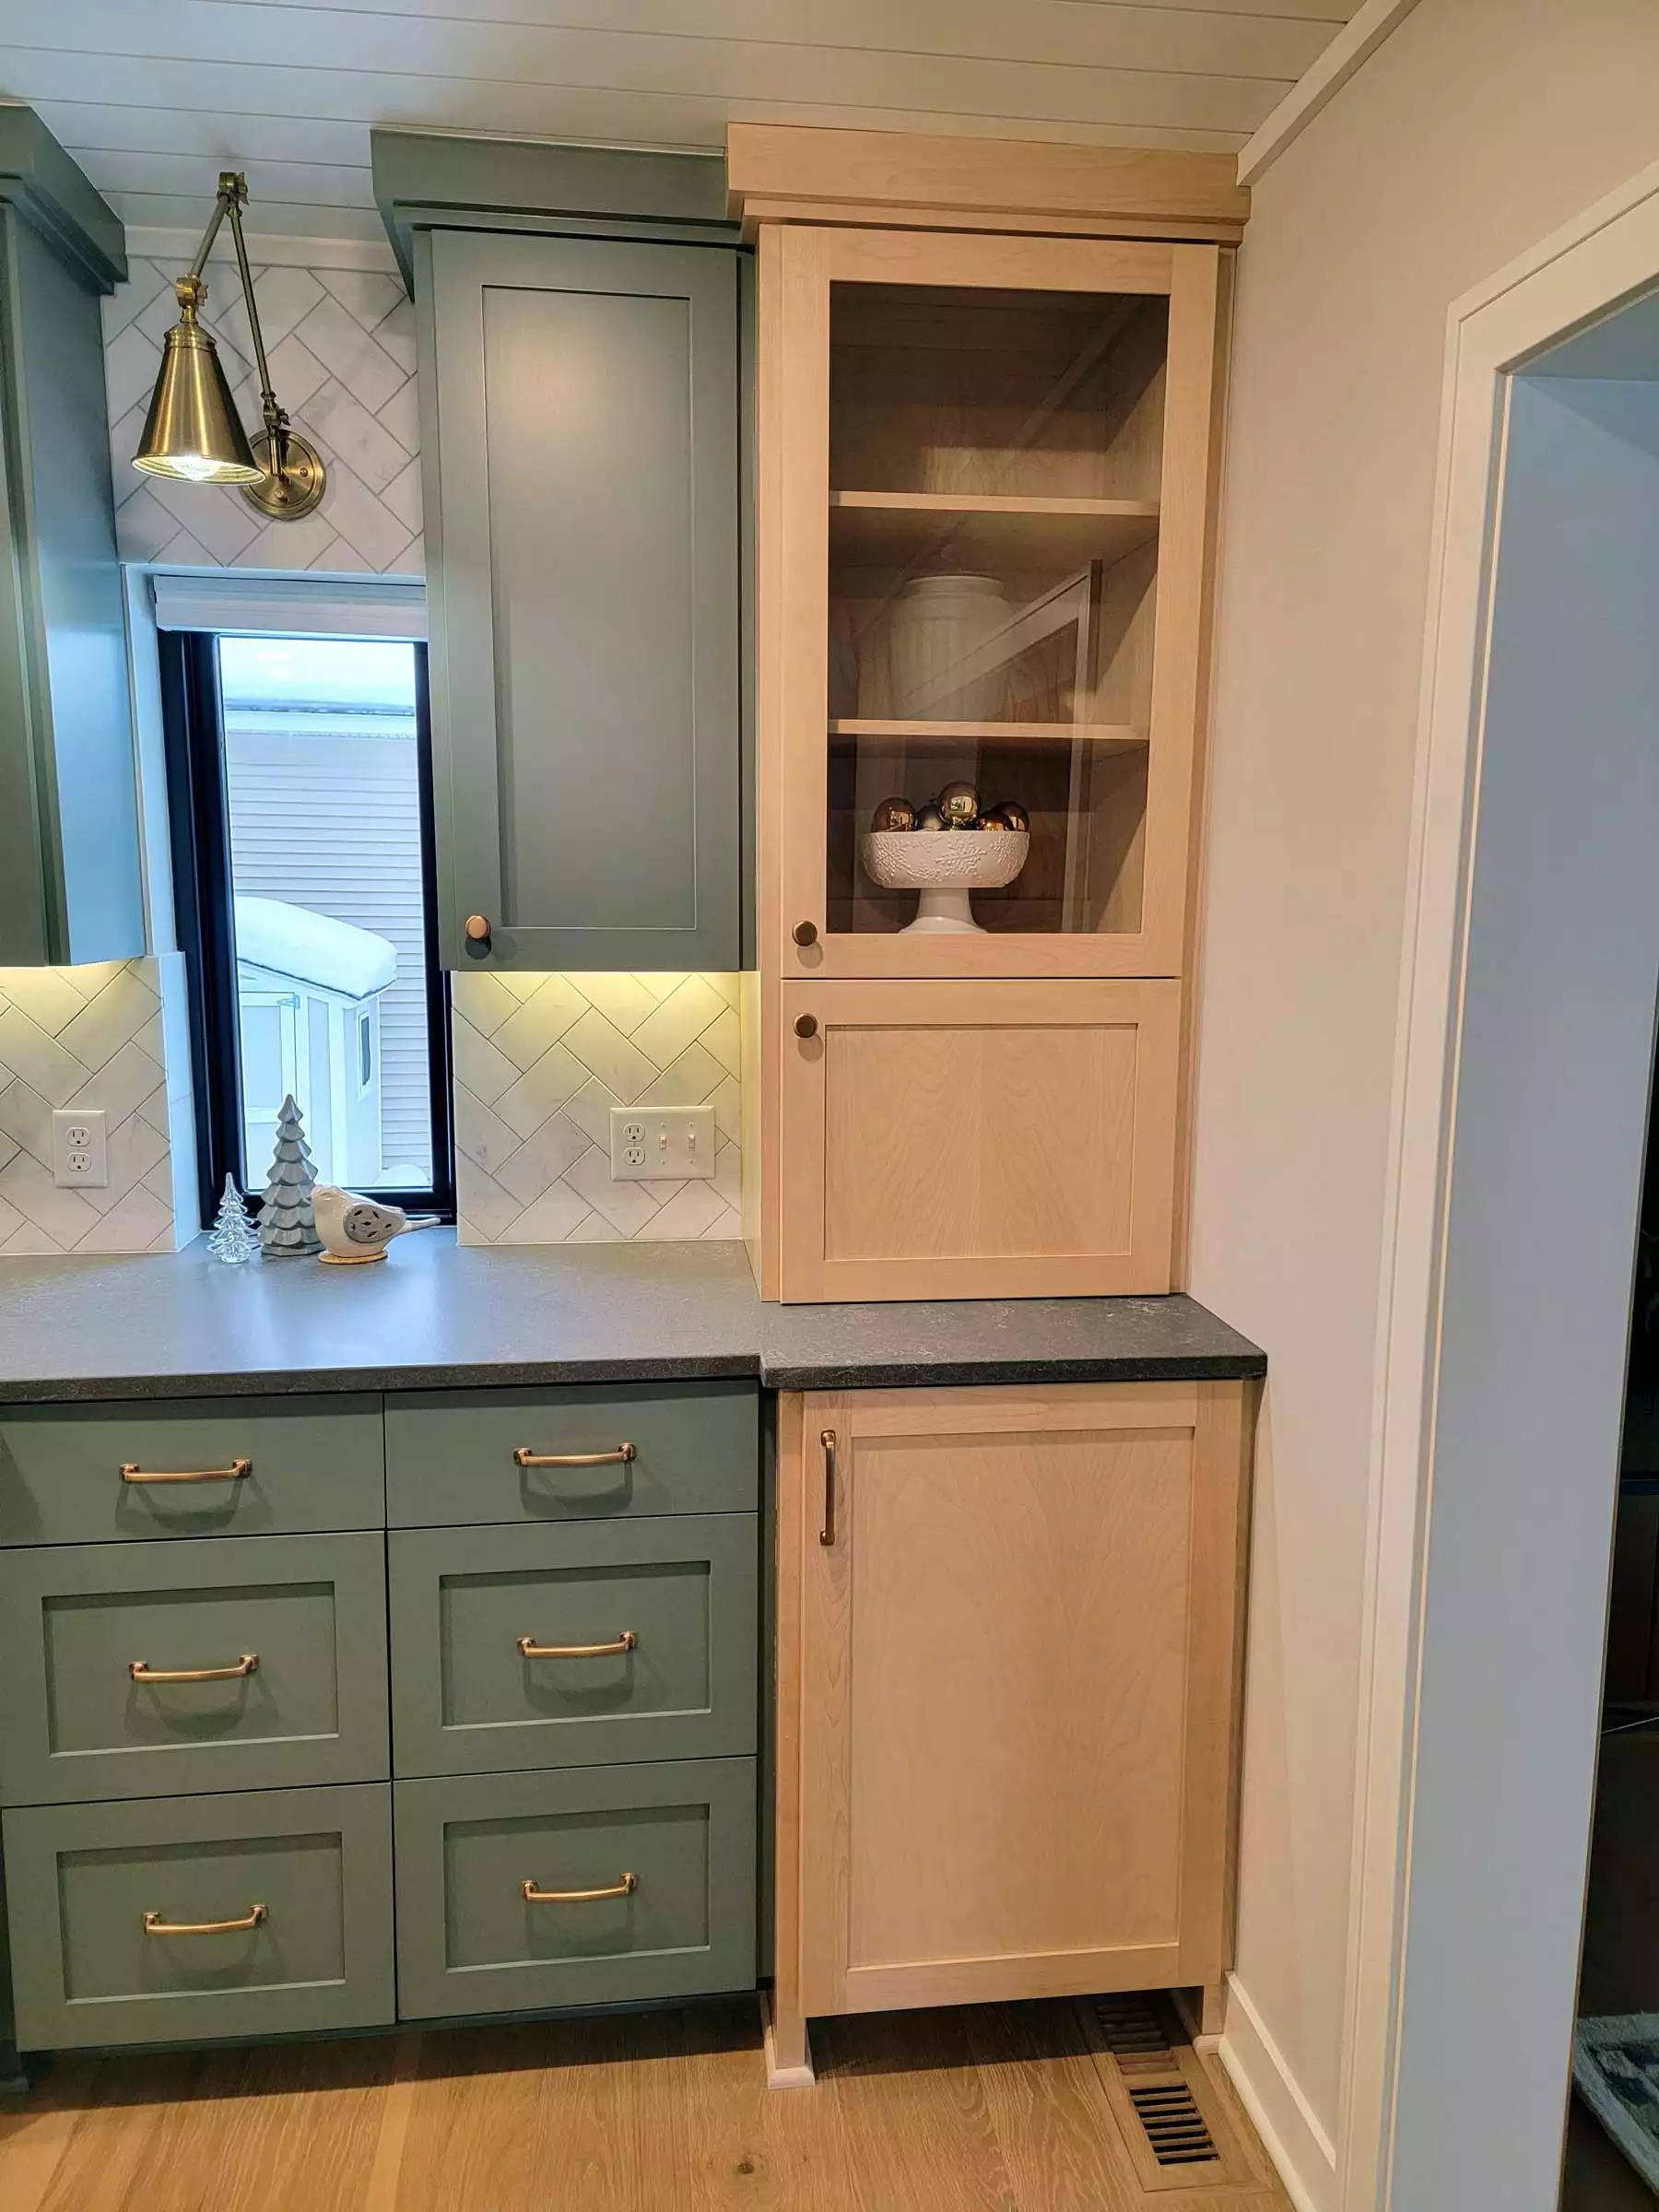 Two Tone Cabinets